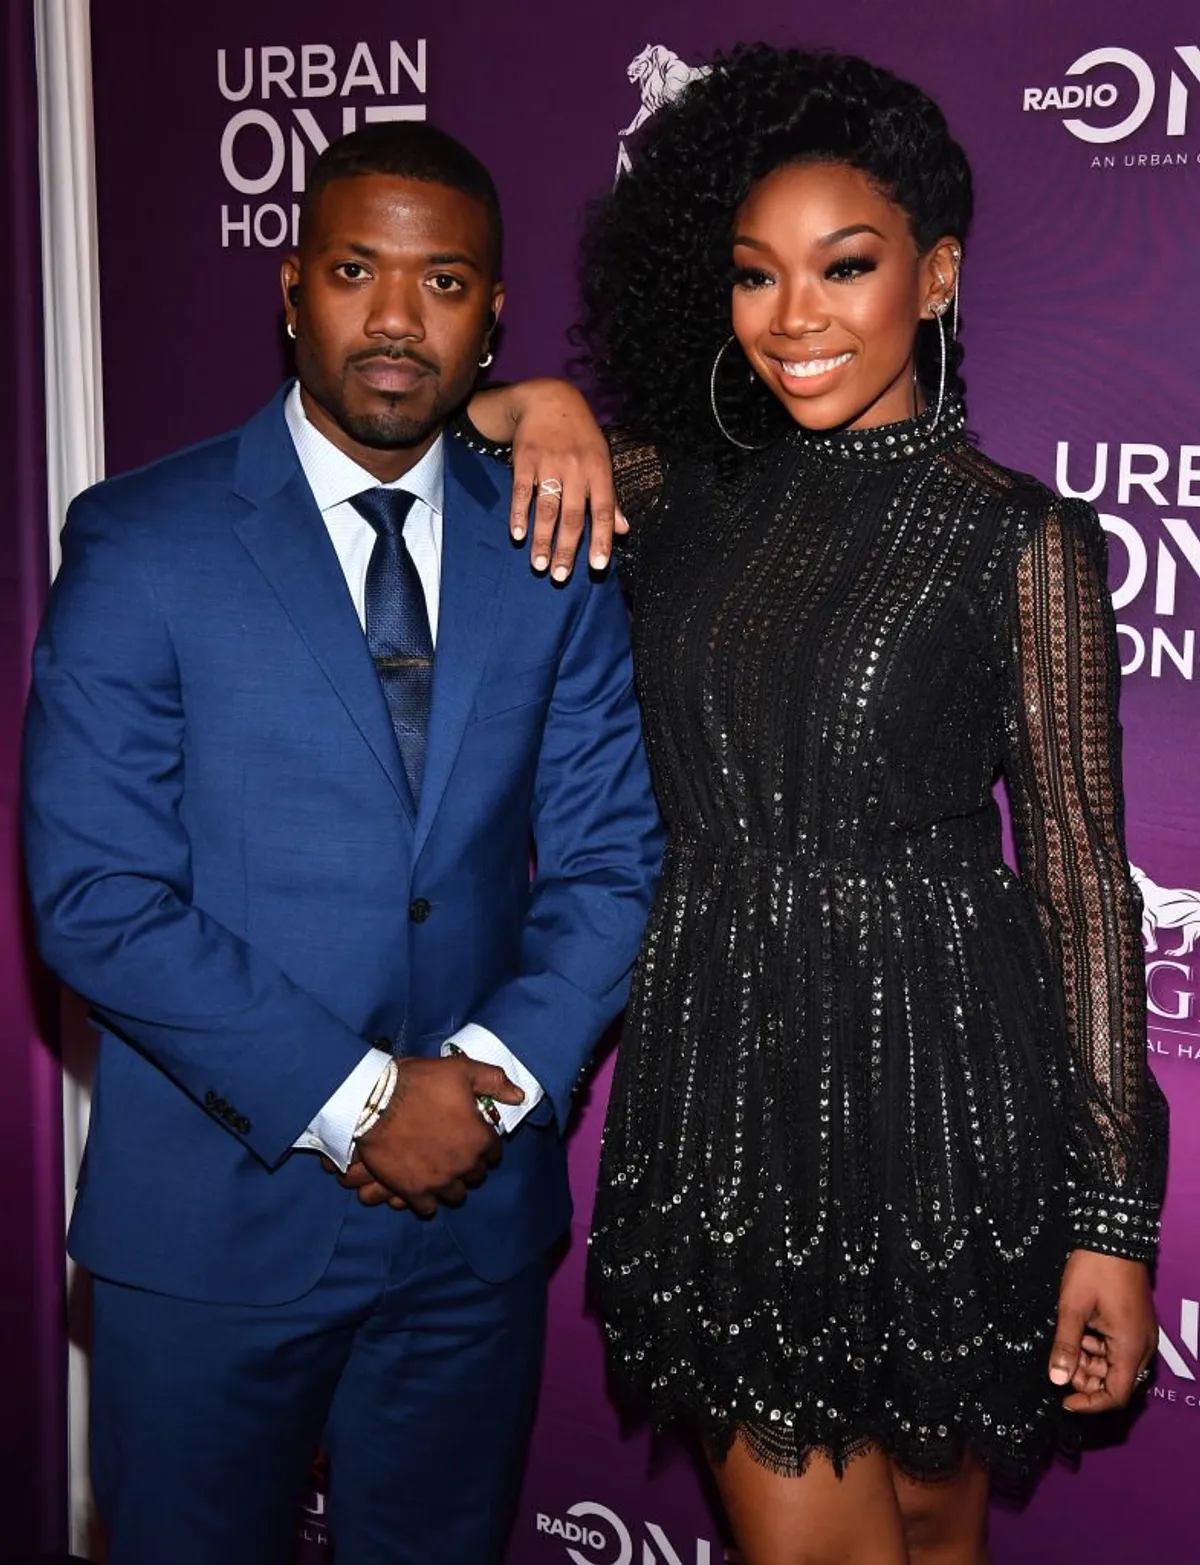 Brandy and Ray J at the 2018 Urban One Honors on December 9, 2018 in Washington, DC. | Photo: Getty Images